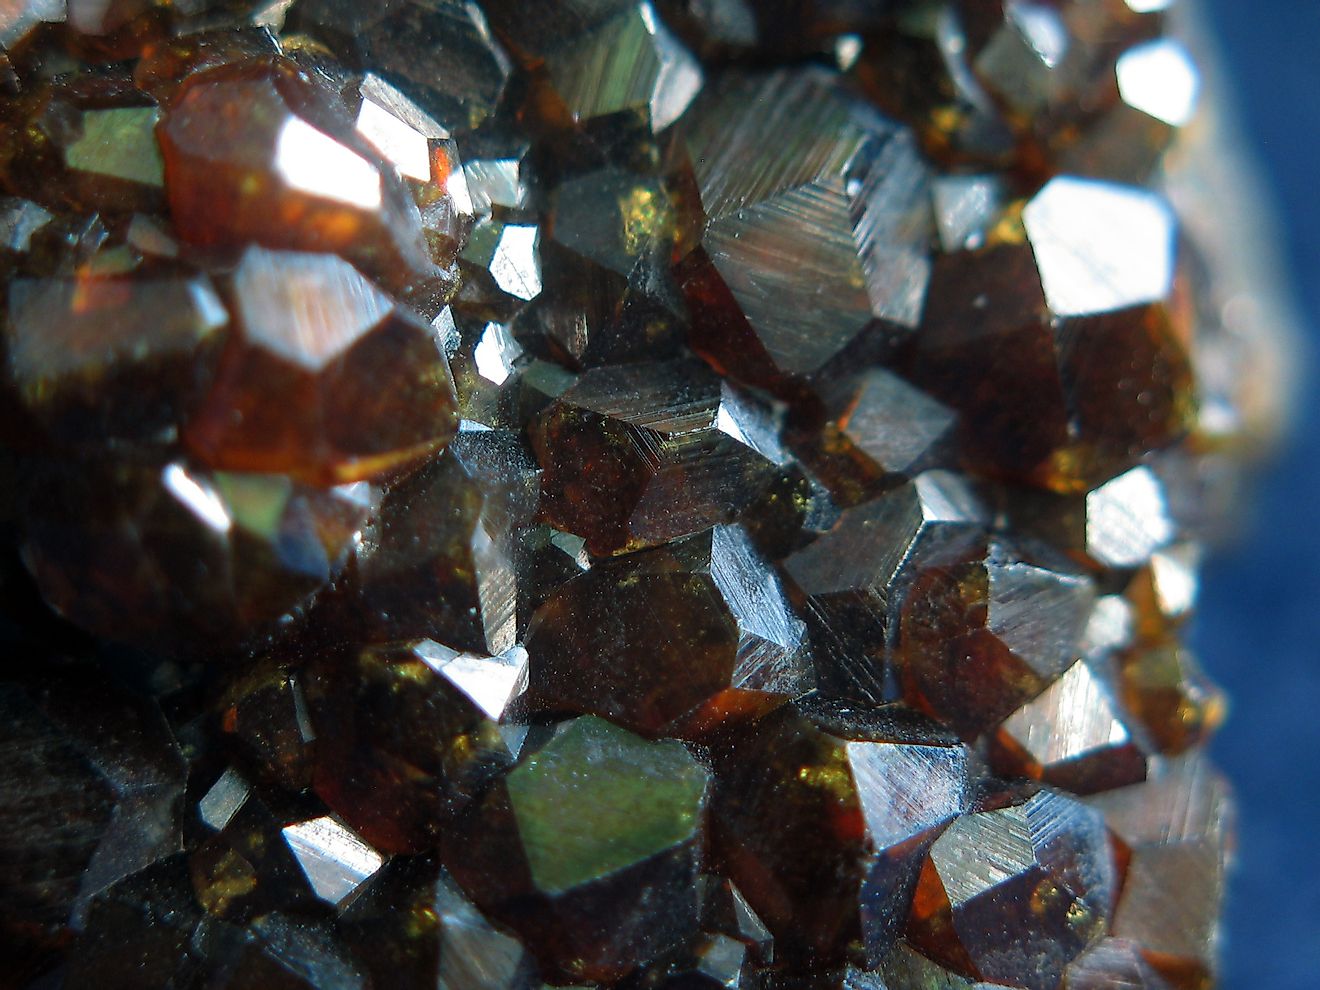 Garnet is a desirable gem to own due to its unique geometric designs and shiny aesthetics. Garnet's hardness also makes it useful for polishing other materials.